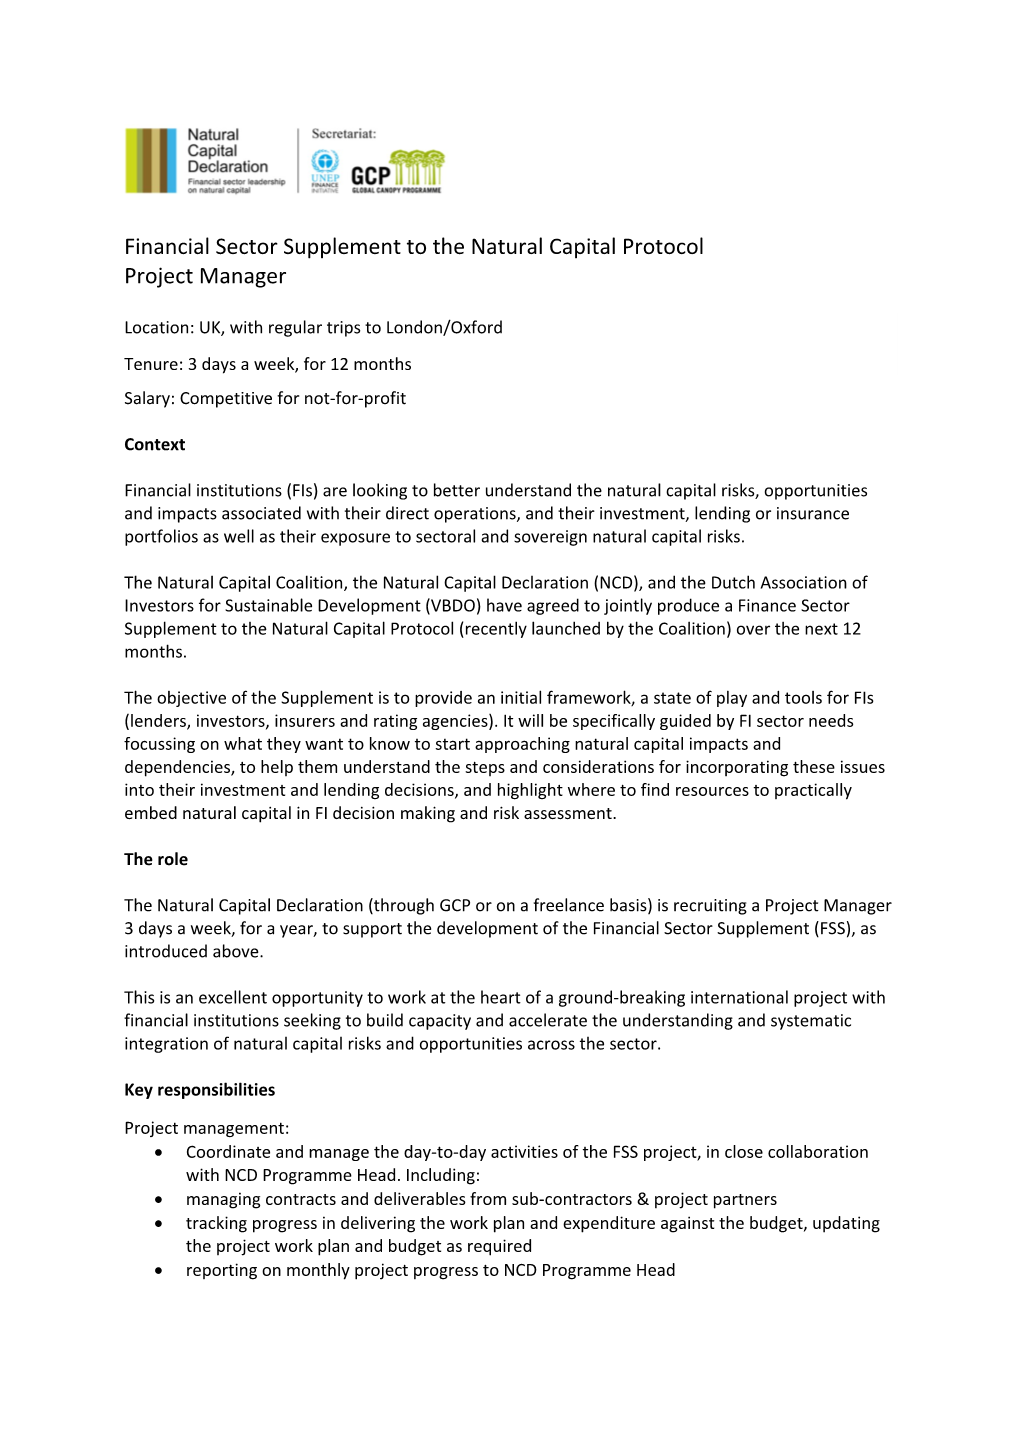 Financial Sector Supplement to the Natural Capital Protocol